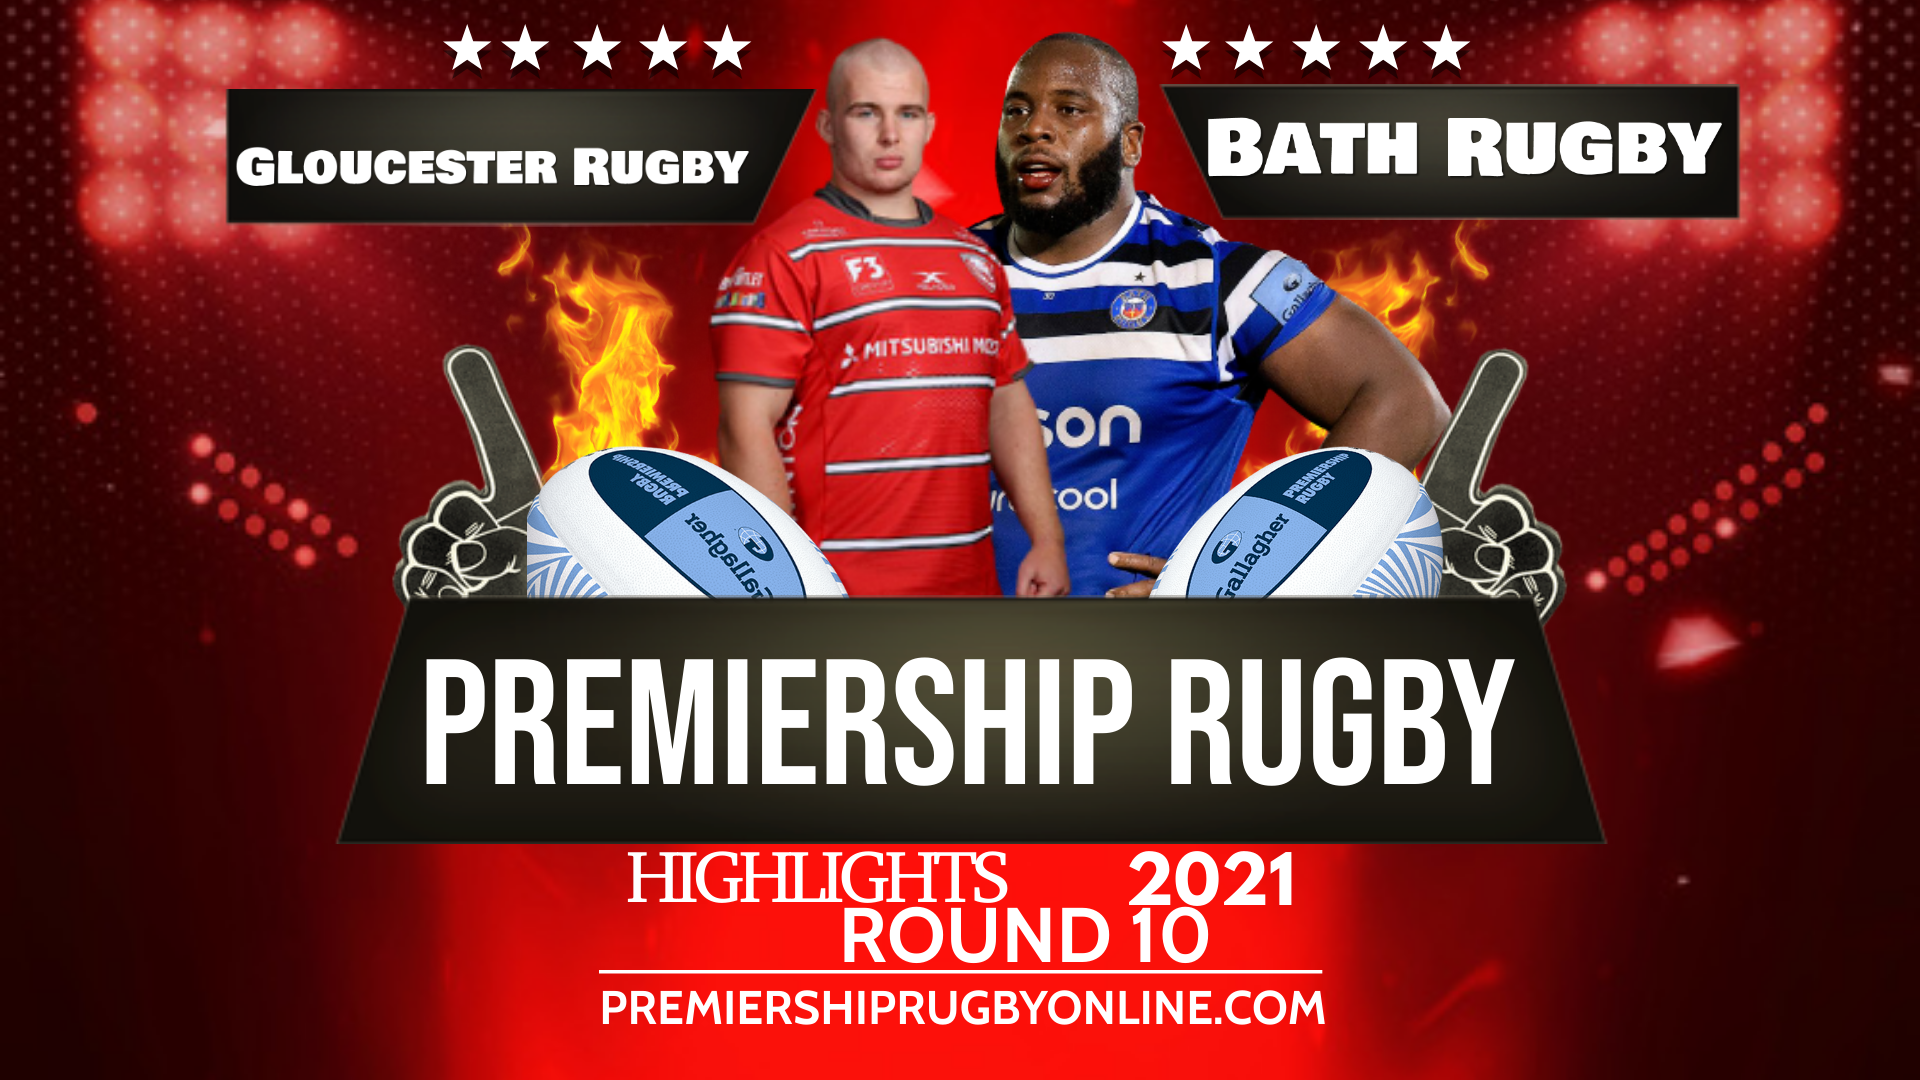 Bath Rugby Vs Gloucester Rugby Highlights 2021 RD 10